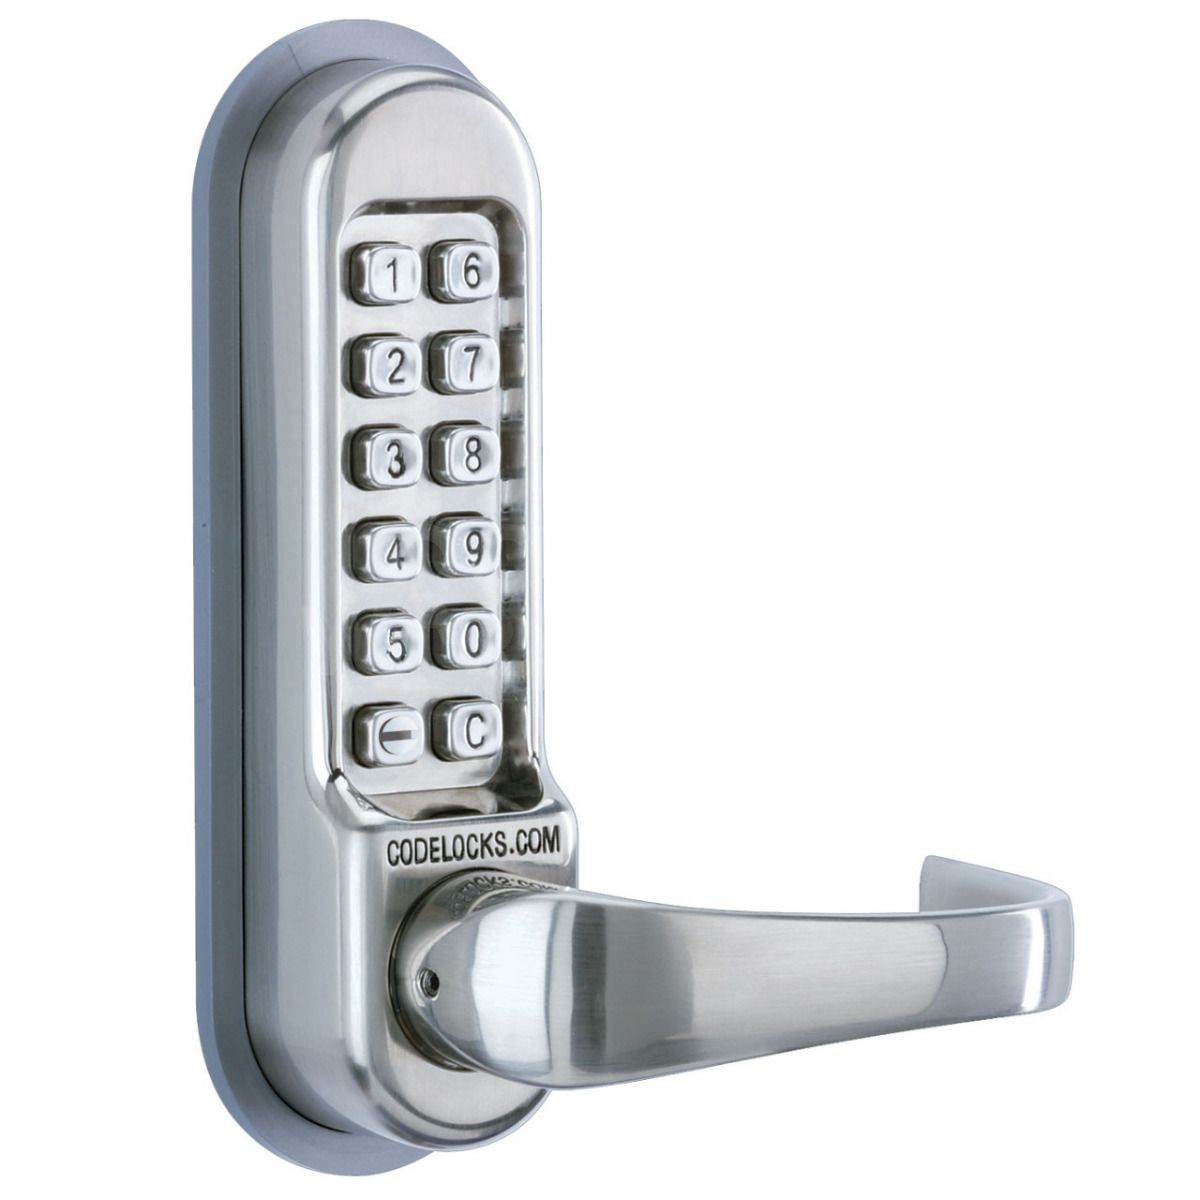 Codelocks 500/505 Mechanical Digital Lock for use with existing lock